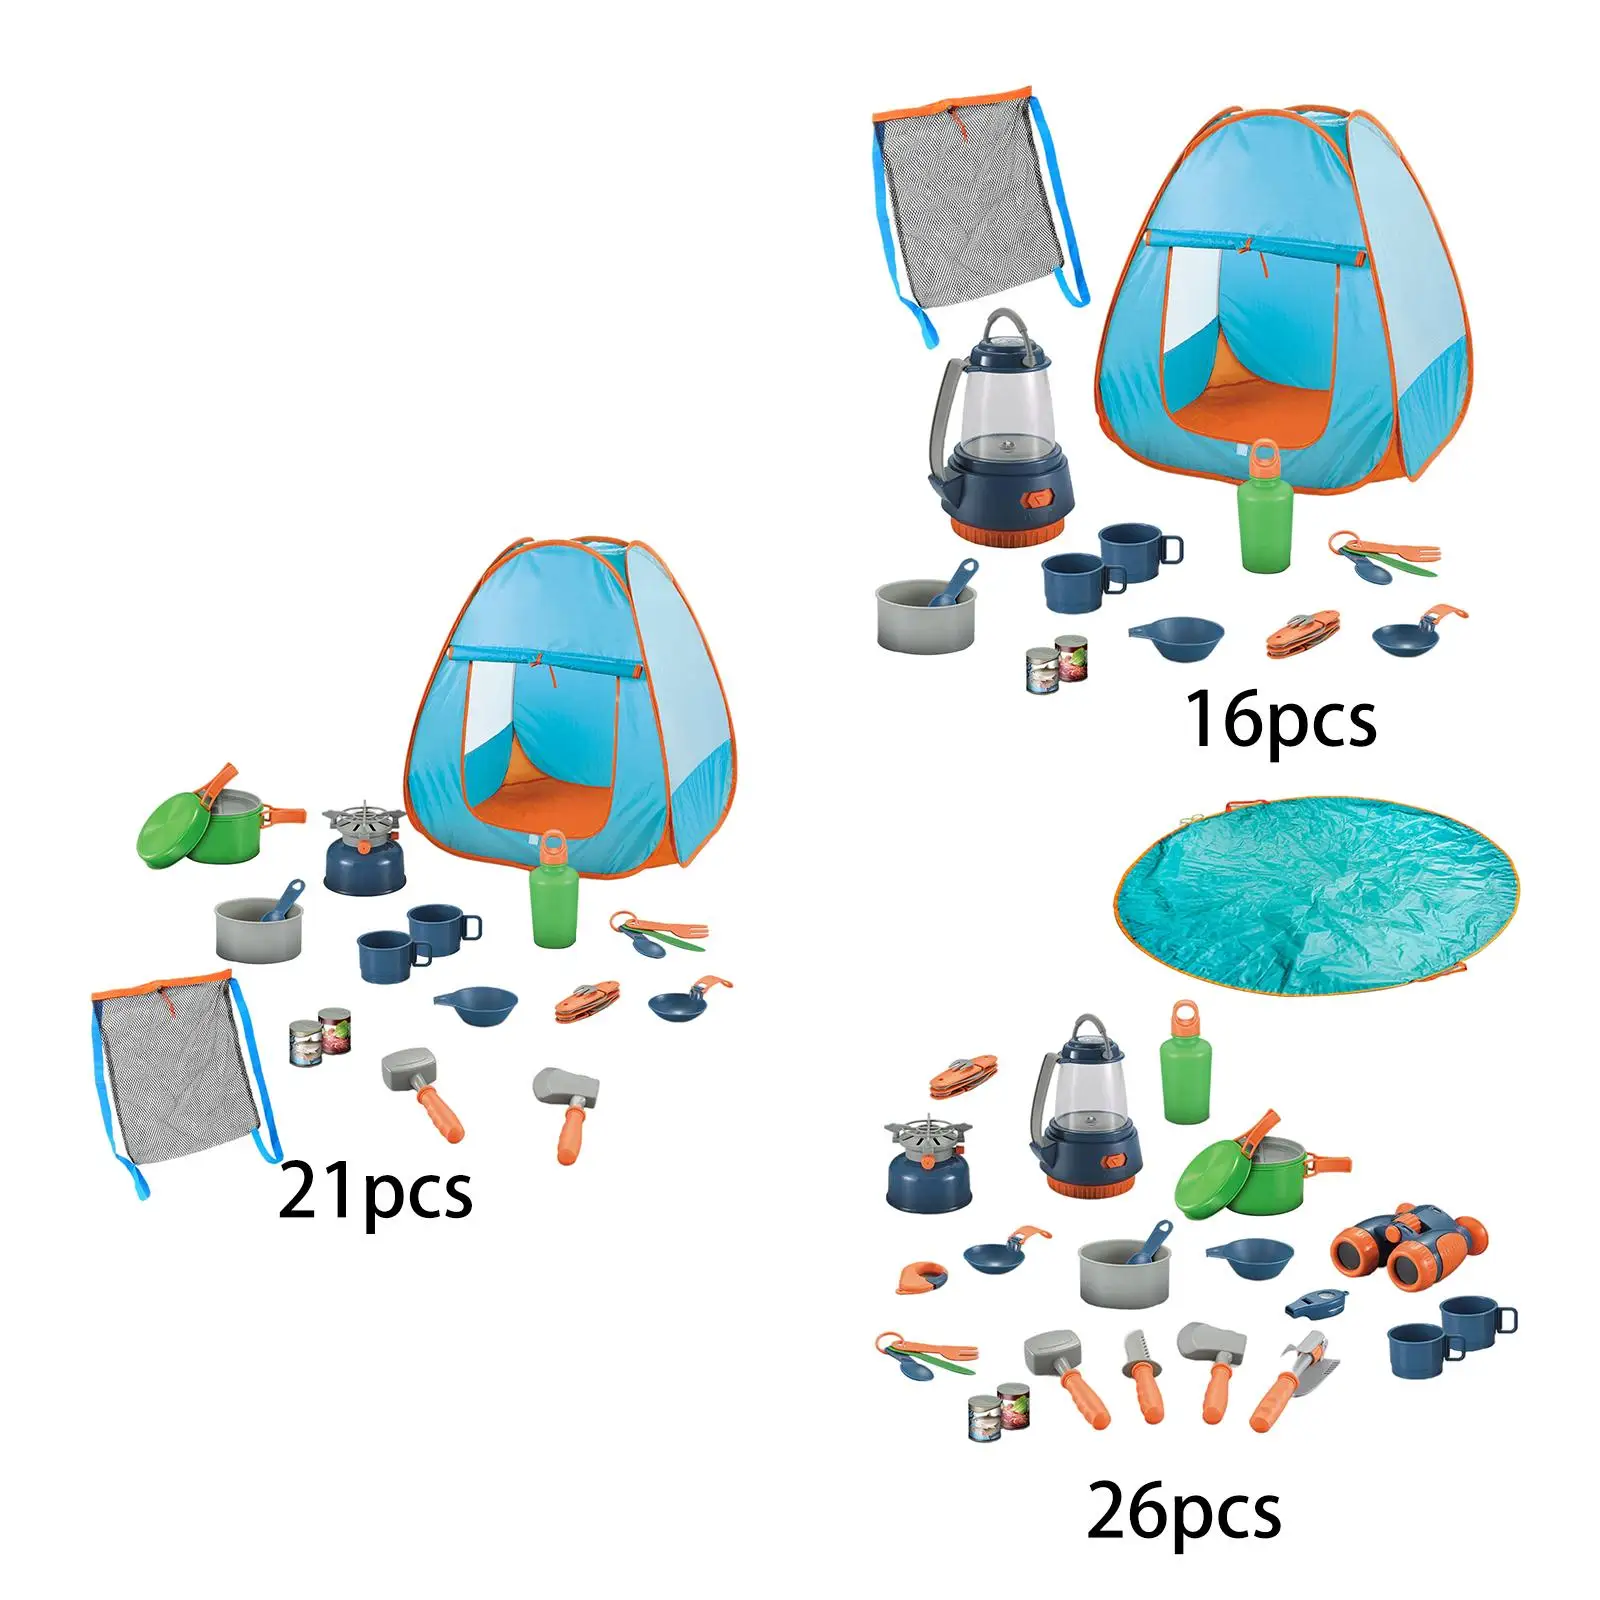 Kids Camping Set with Tent Camping Equipment Tool Pretend Play Set for Toddlers Children Boys